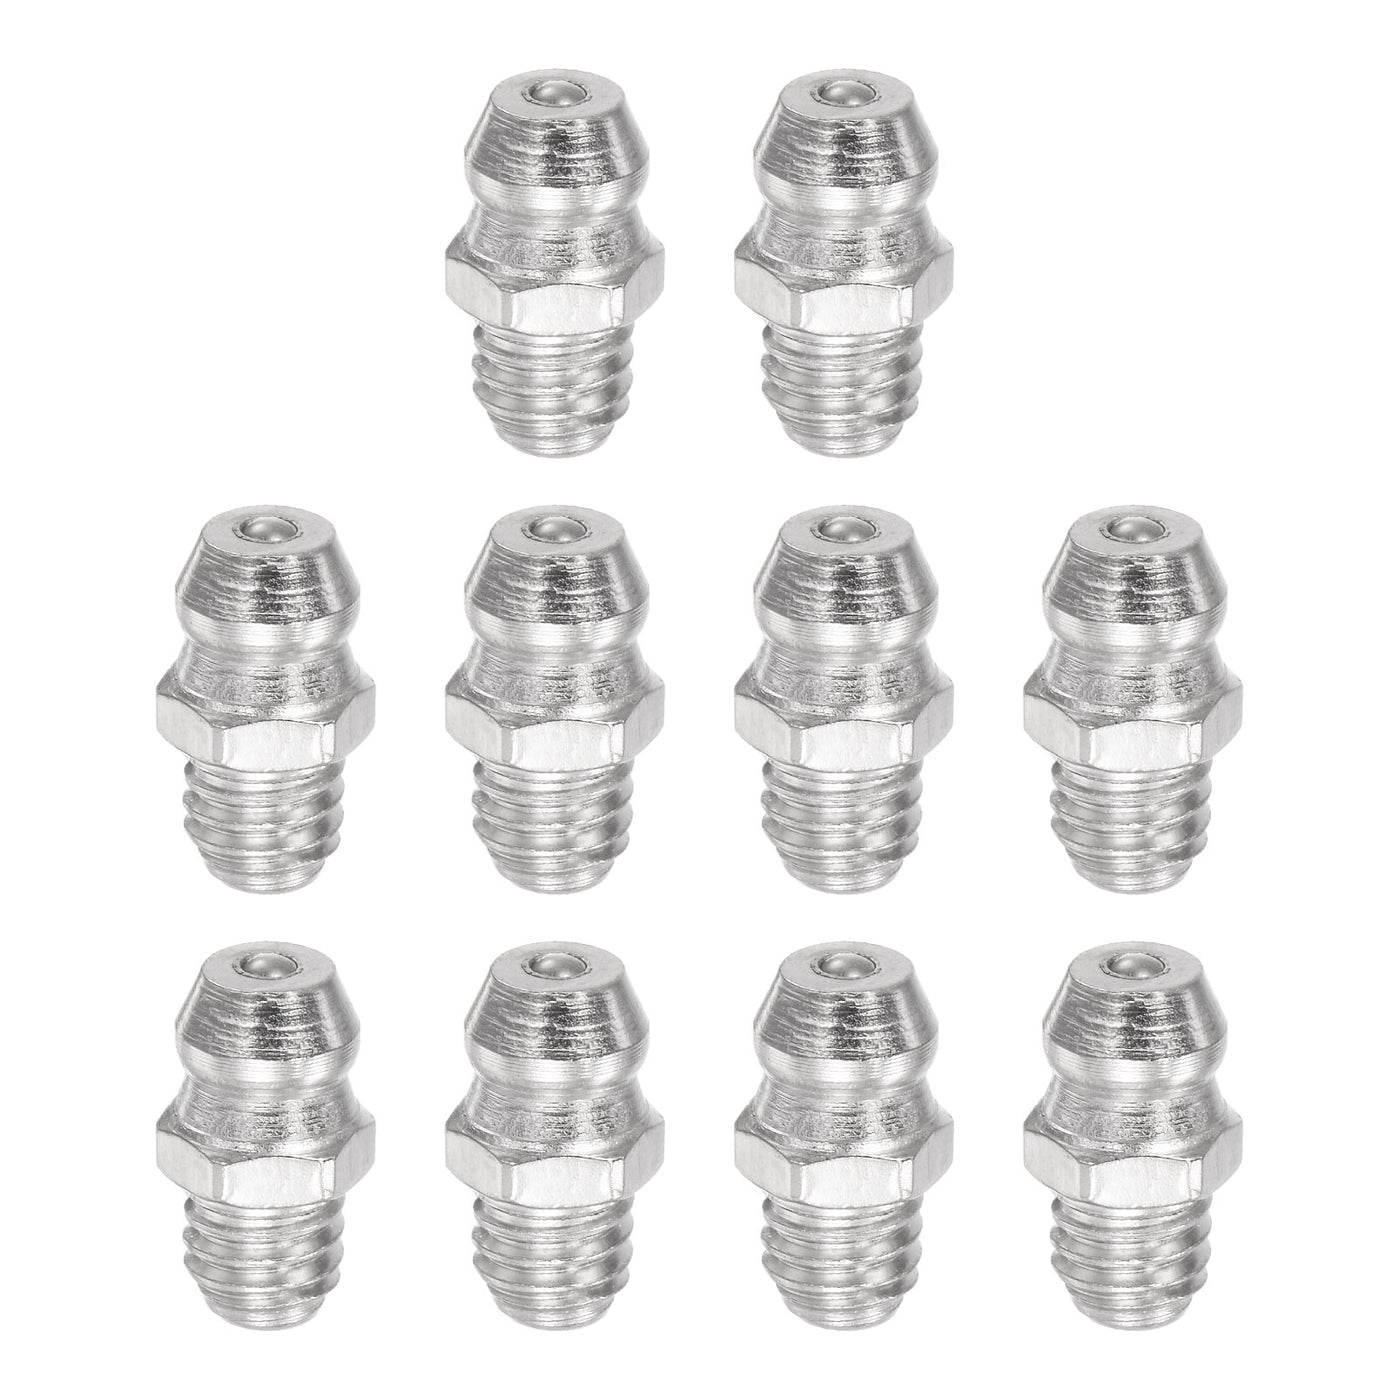 Uxcell Uxcell Nickel-Plated Iron Straight Hydraulic Grease Fitting M8 x 1mm Thread, 50Pcs